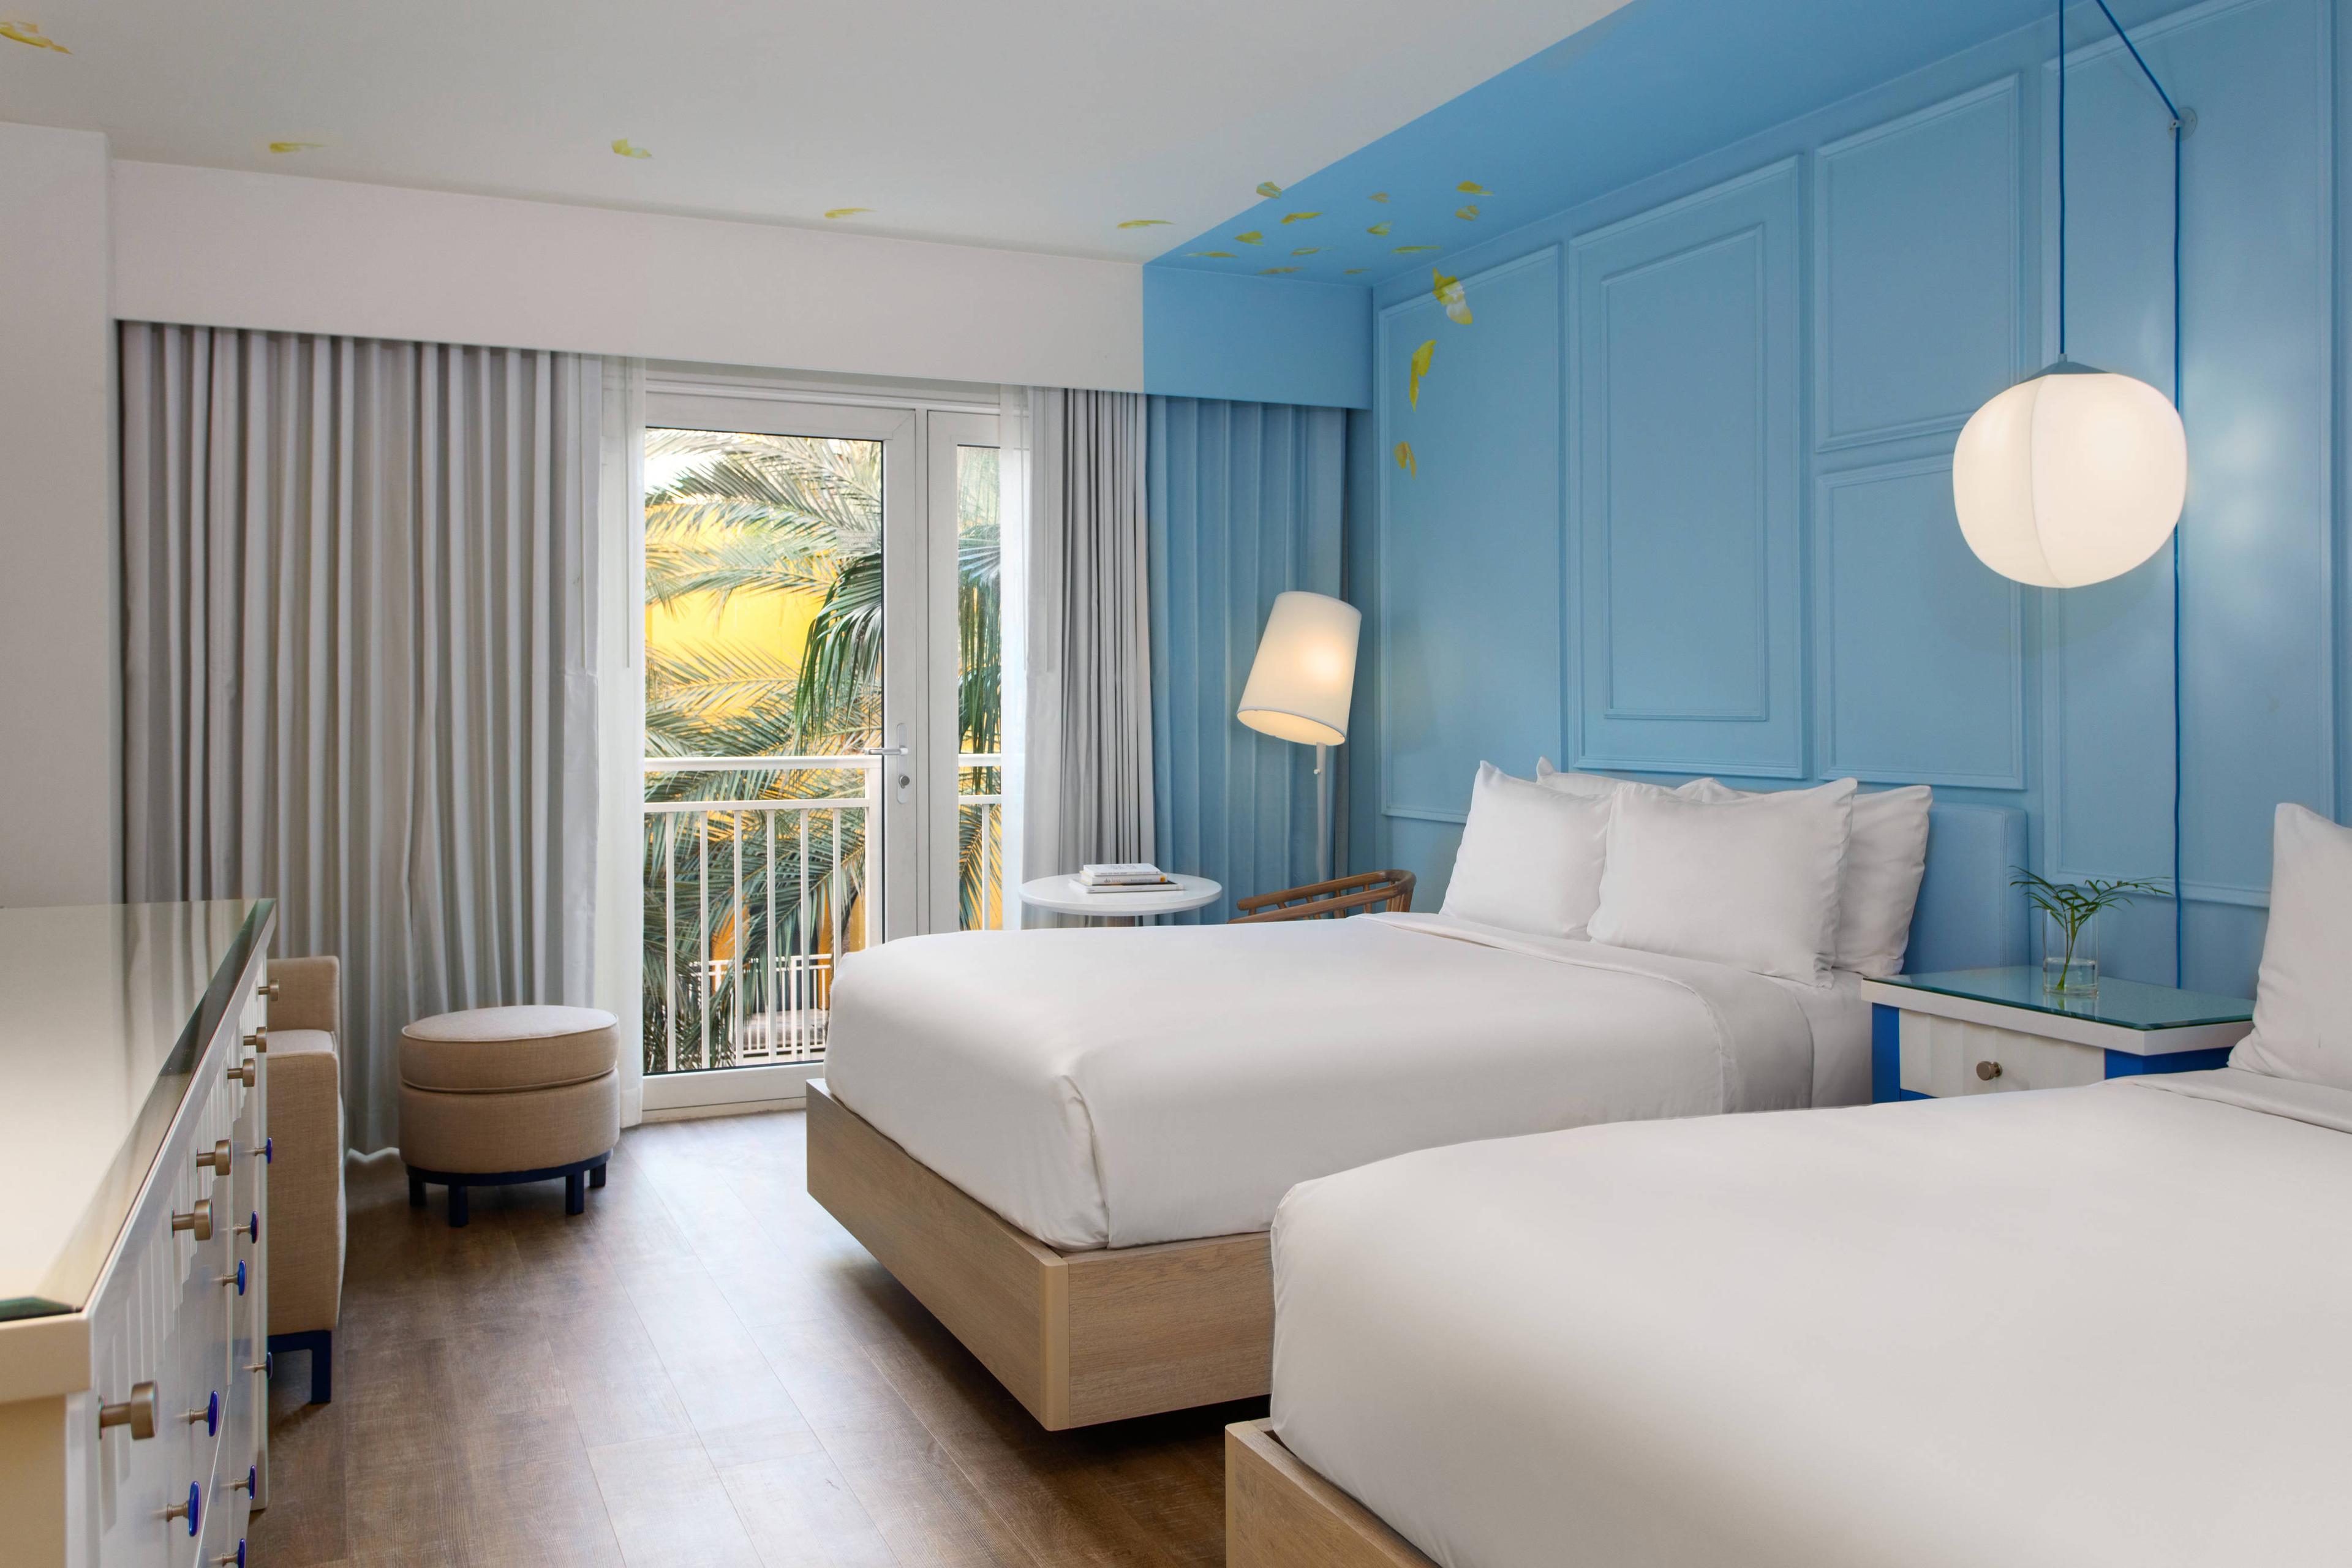 Style and comfort come together in our spacious rooms, offering two plush beds and resort views.